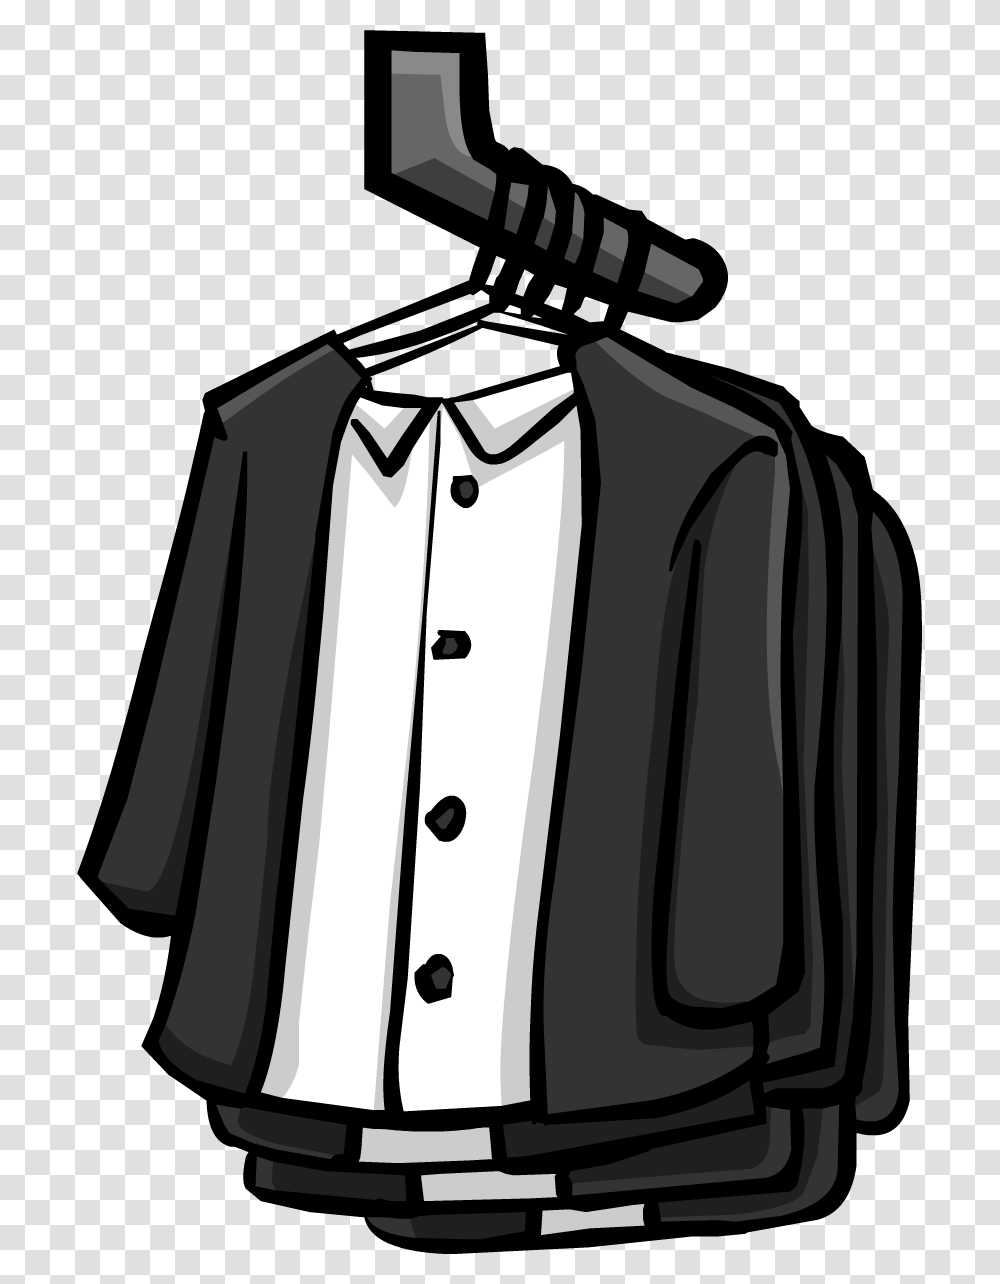 Wall Club Penguin Wiki Clothes In The Hanger Clipart Black Amp White, Shirt, Sleeve, Long Sleeve Transparent Png